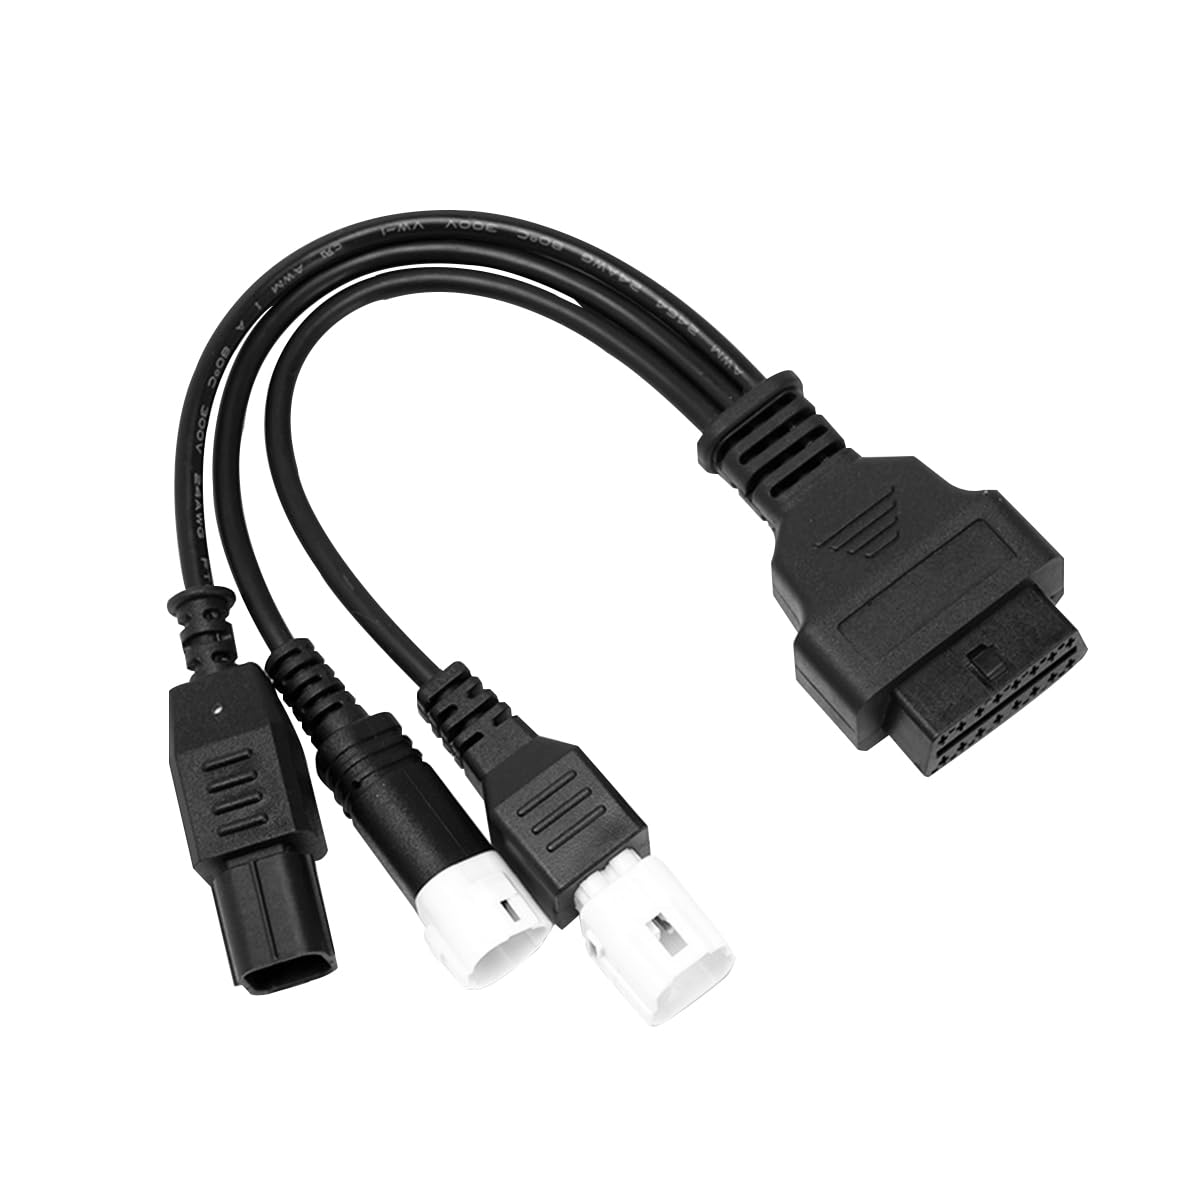 CGEAMDY 3 4 6-Pin Auf 16-Pin OBD2 Adapter Stecker Diagnosekabel, Motorrad-Scanner OBD2-Adapter, 3 4 6-Poliges OBD2-Diagnosekabel OBD-Fehlercode-Lesegerät-Adapter von CGEAMDY